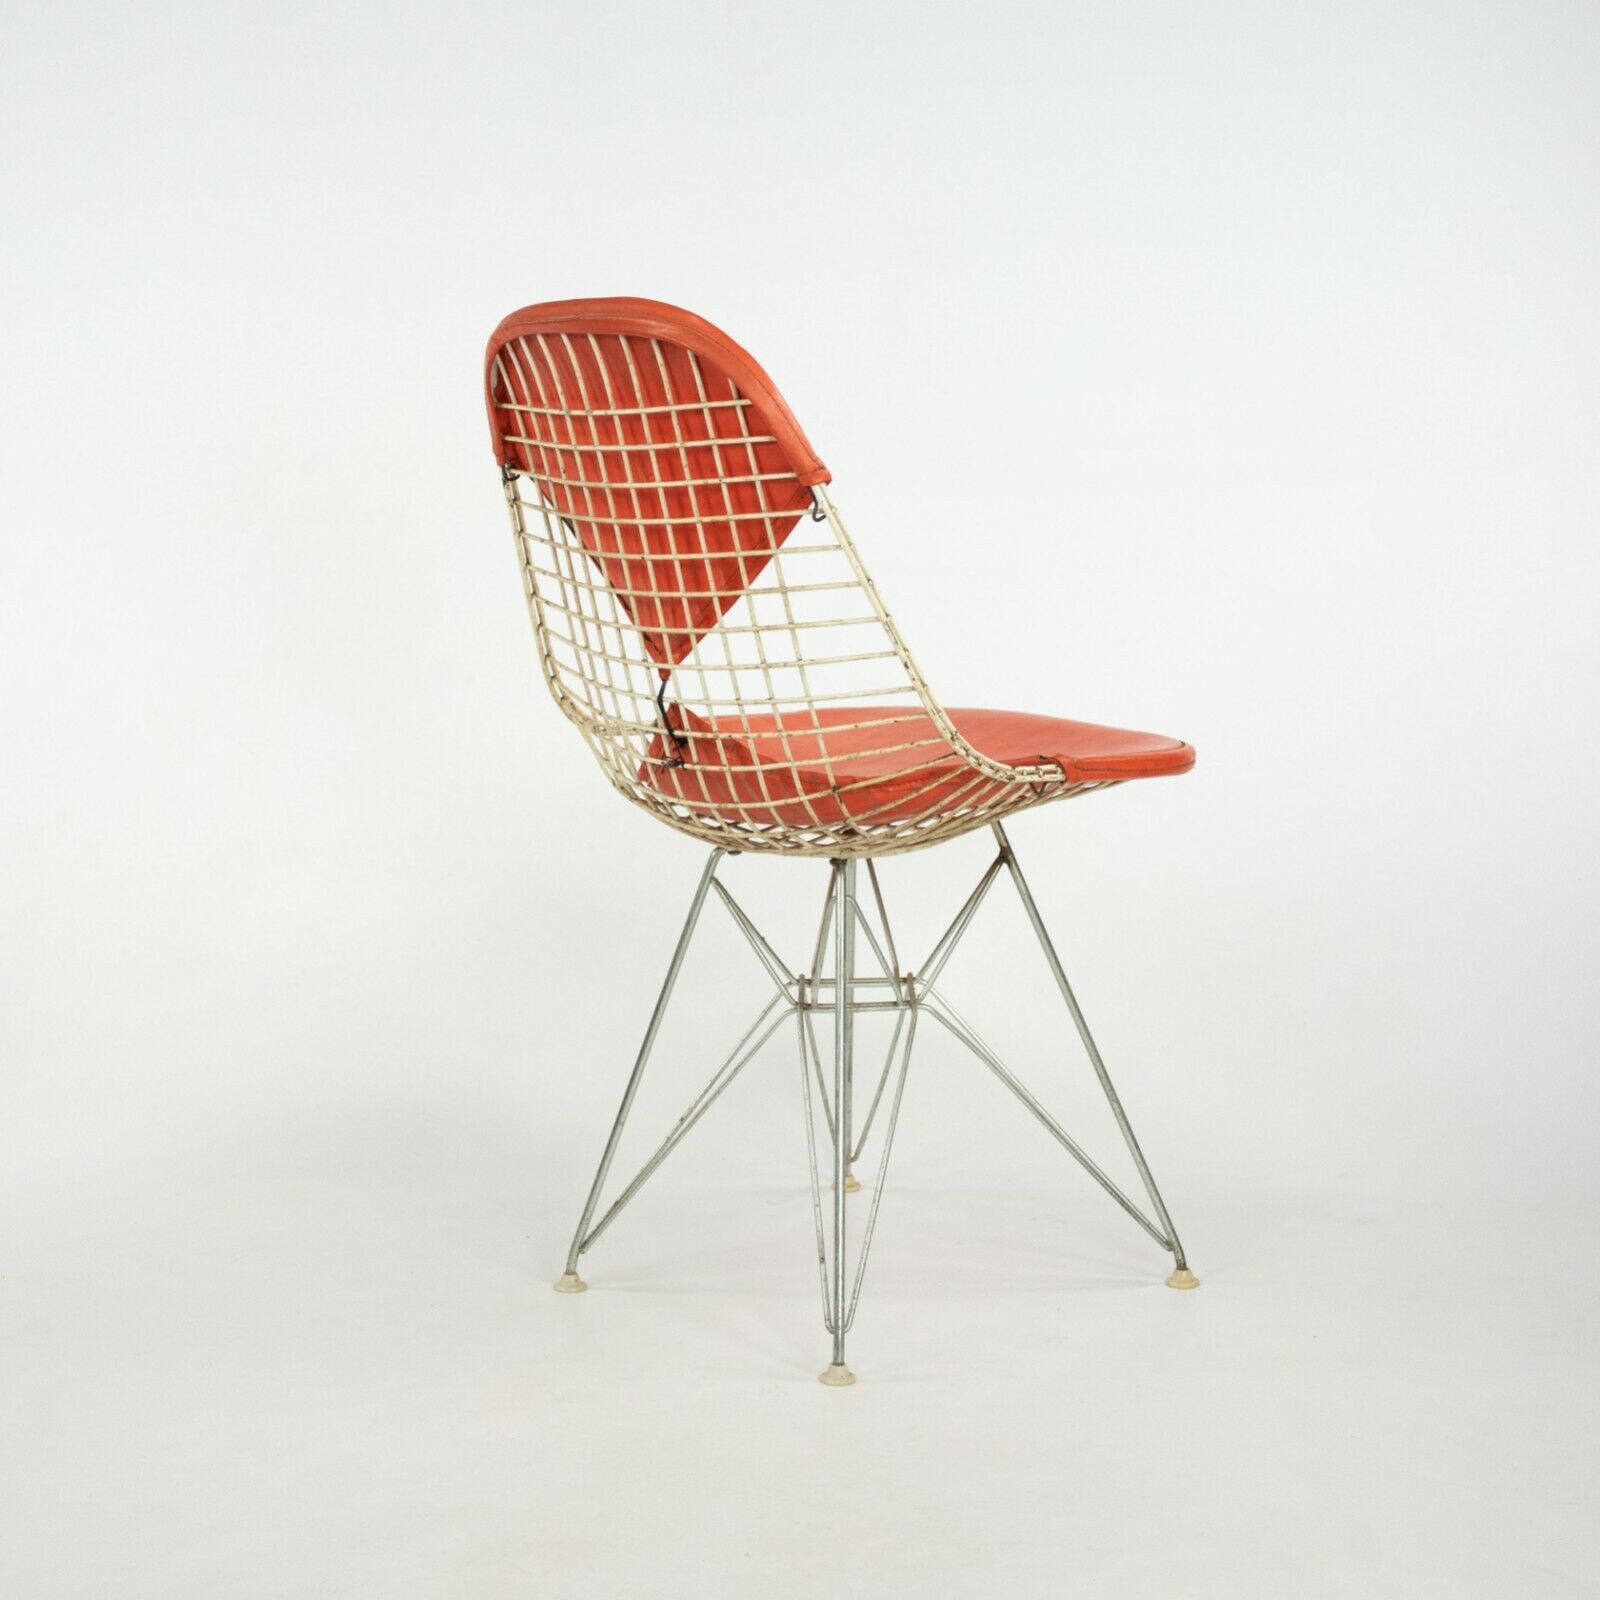 1957 Herman Miller Eames DKR-2 Dining / Side Chairs Set of Five with Orange Pads